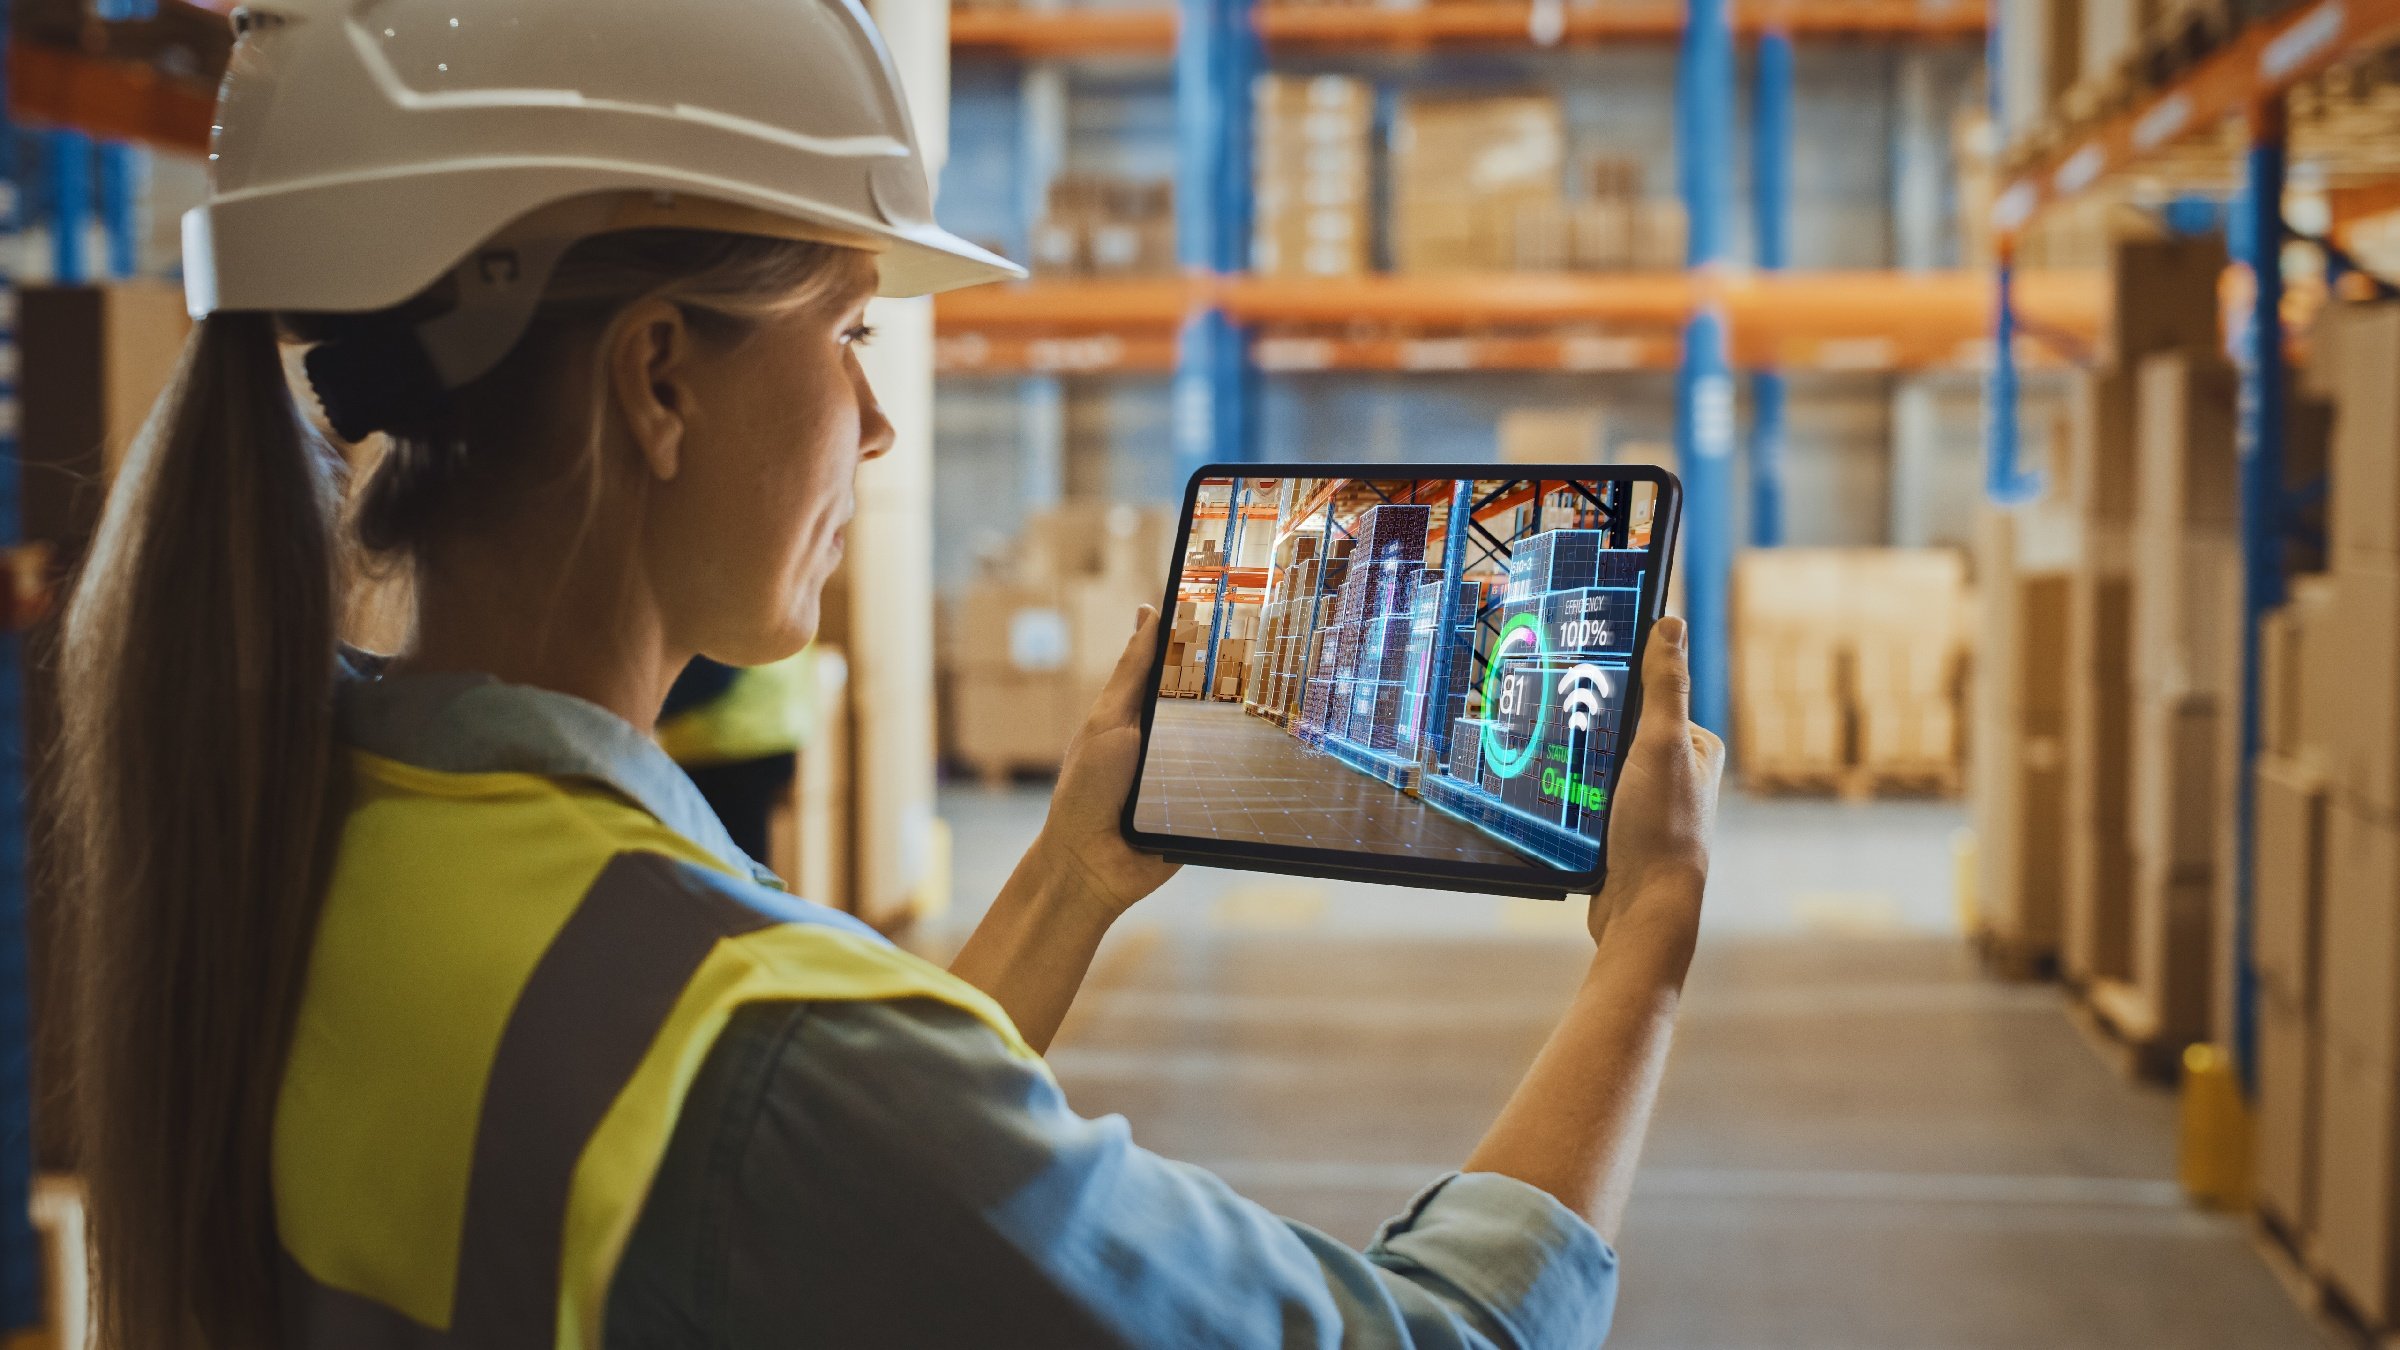 Female using digital twin supply chain warehouse reality application an a tablet